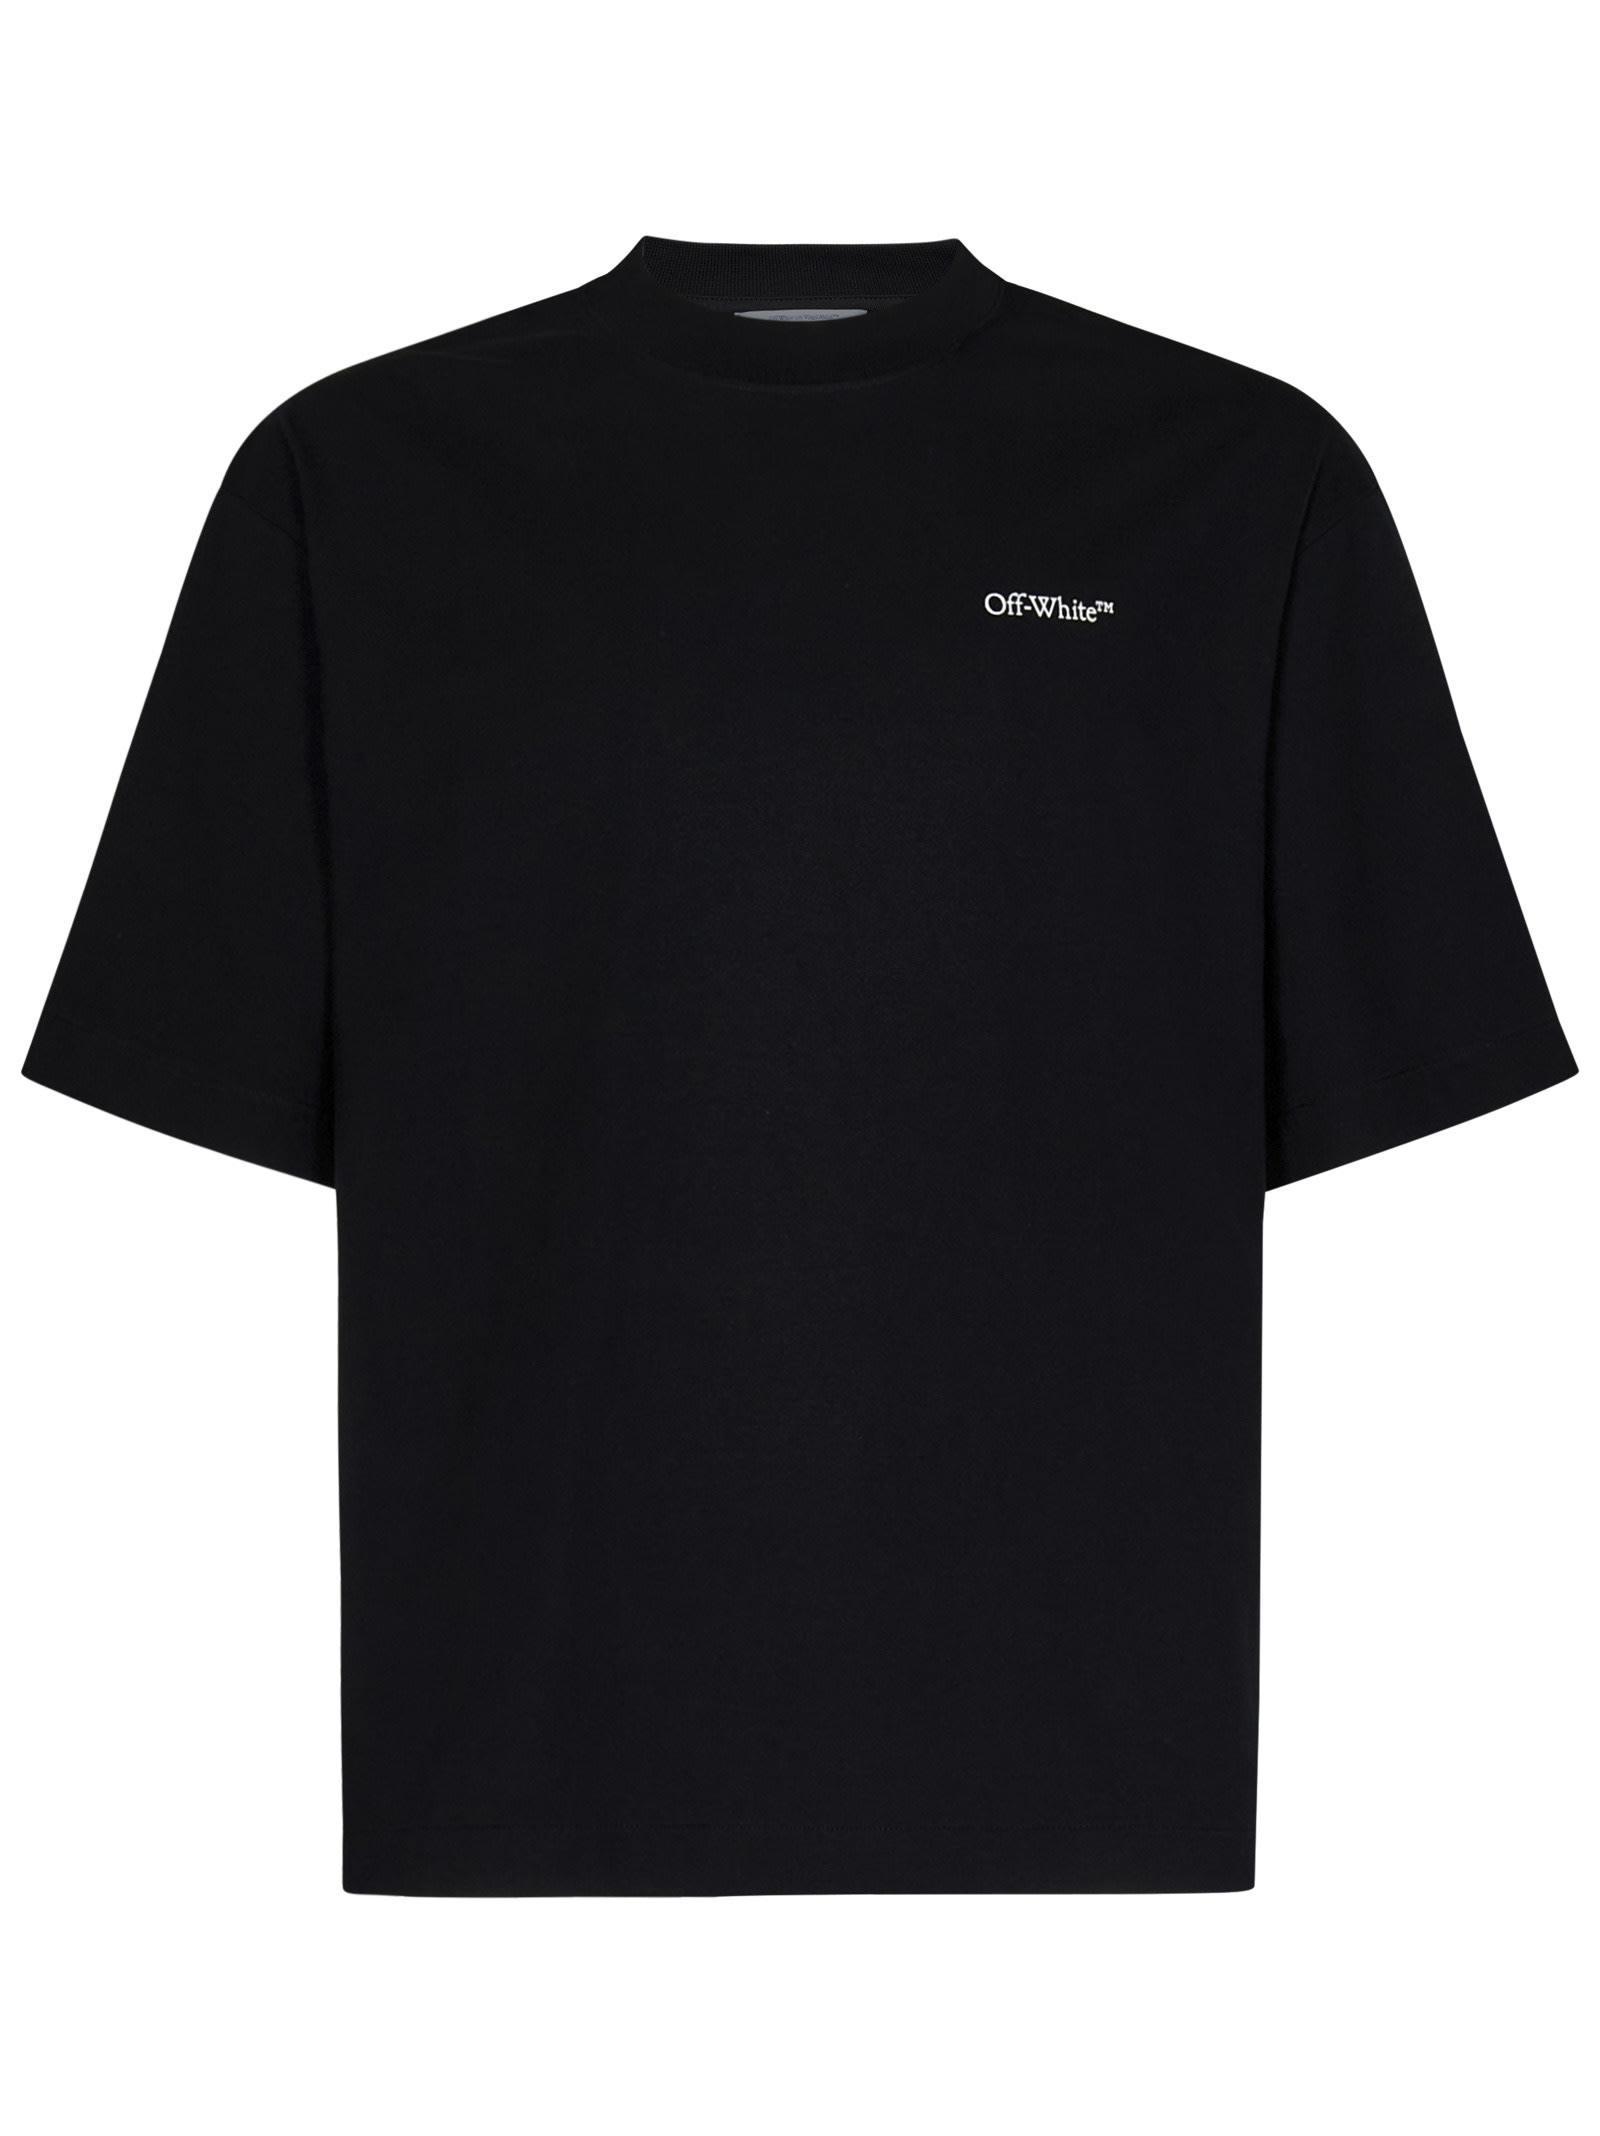 OFF-WHITE T-SHIRT IN BLACK COTTON